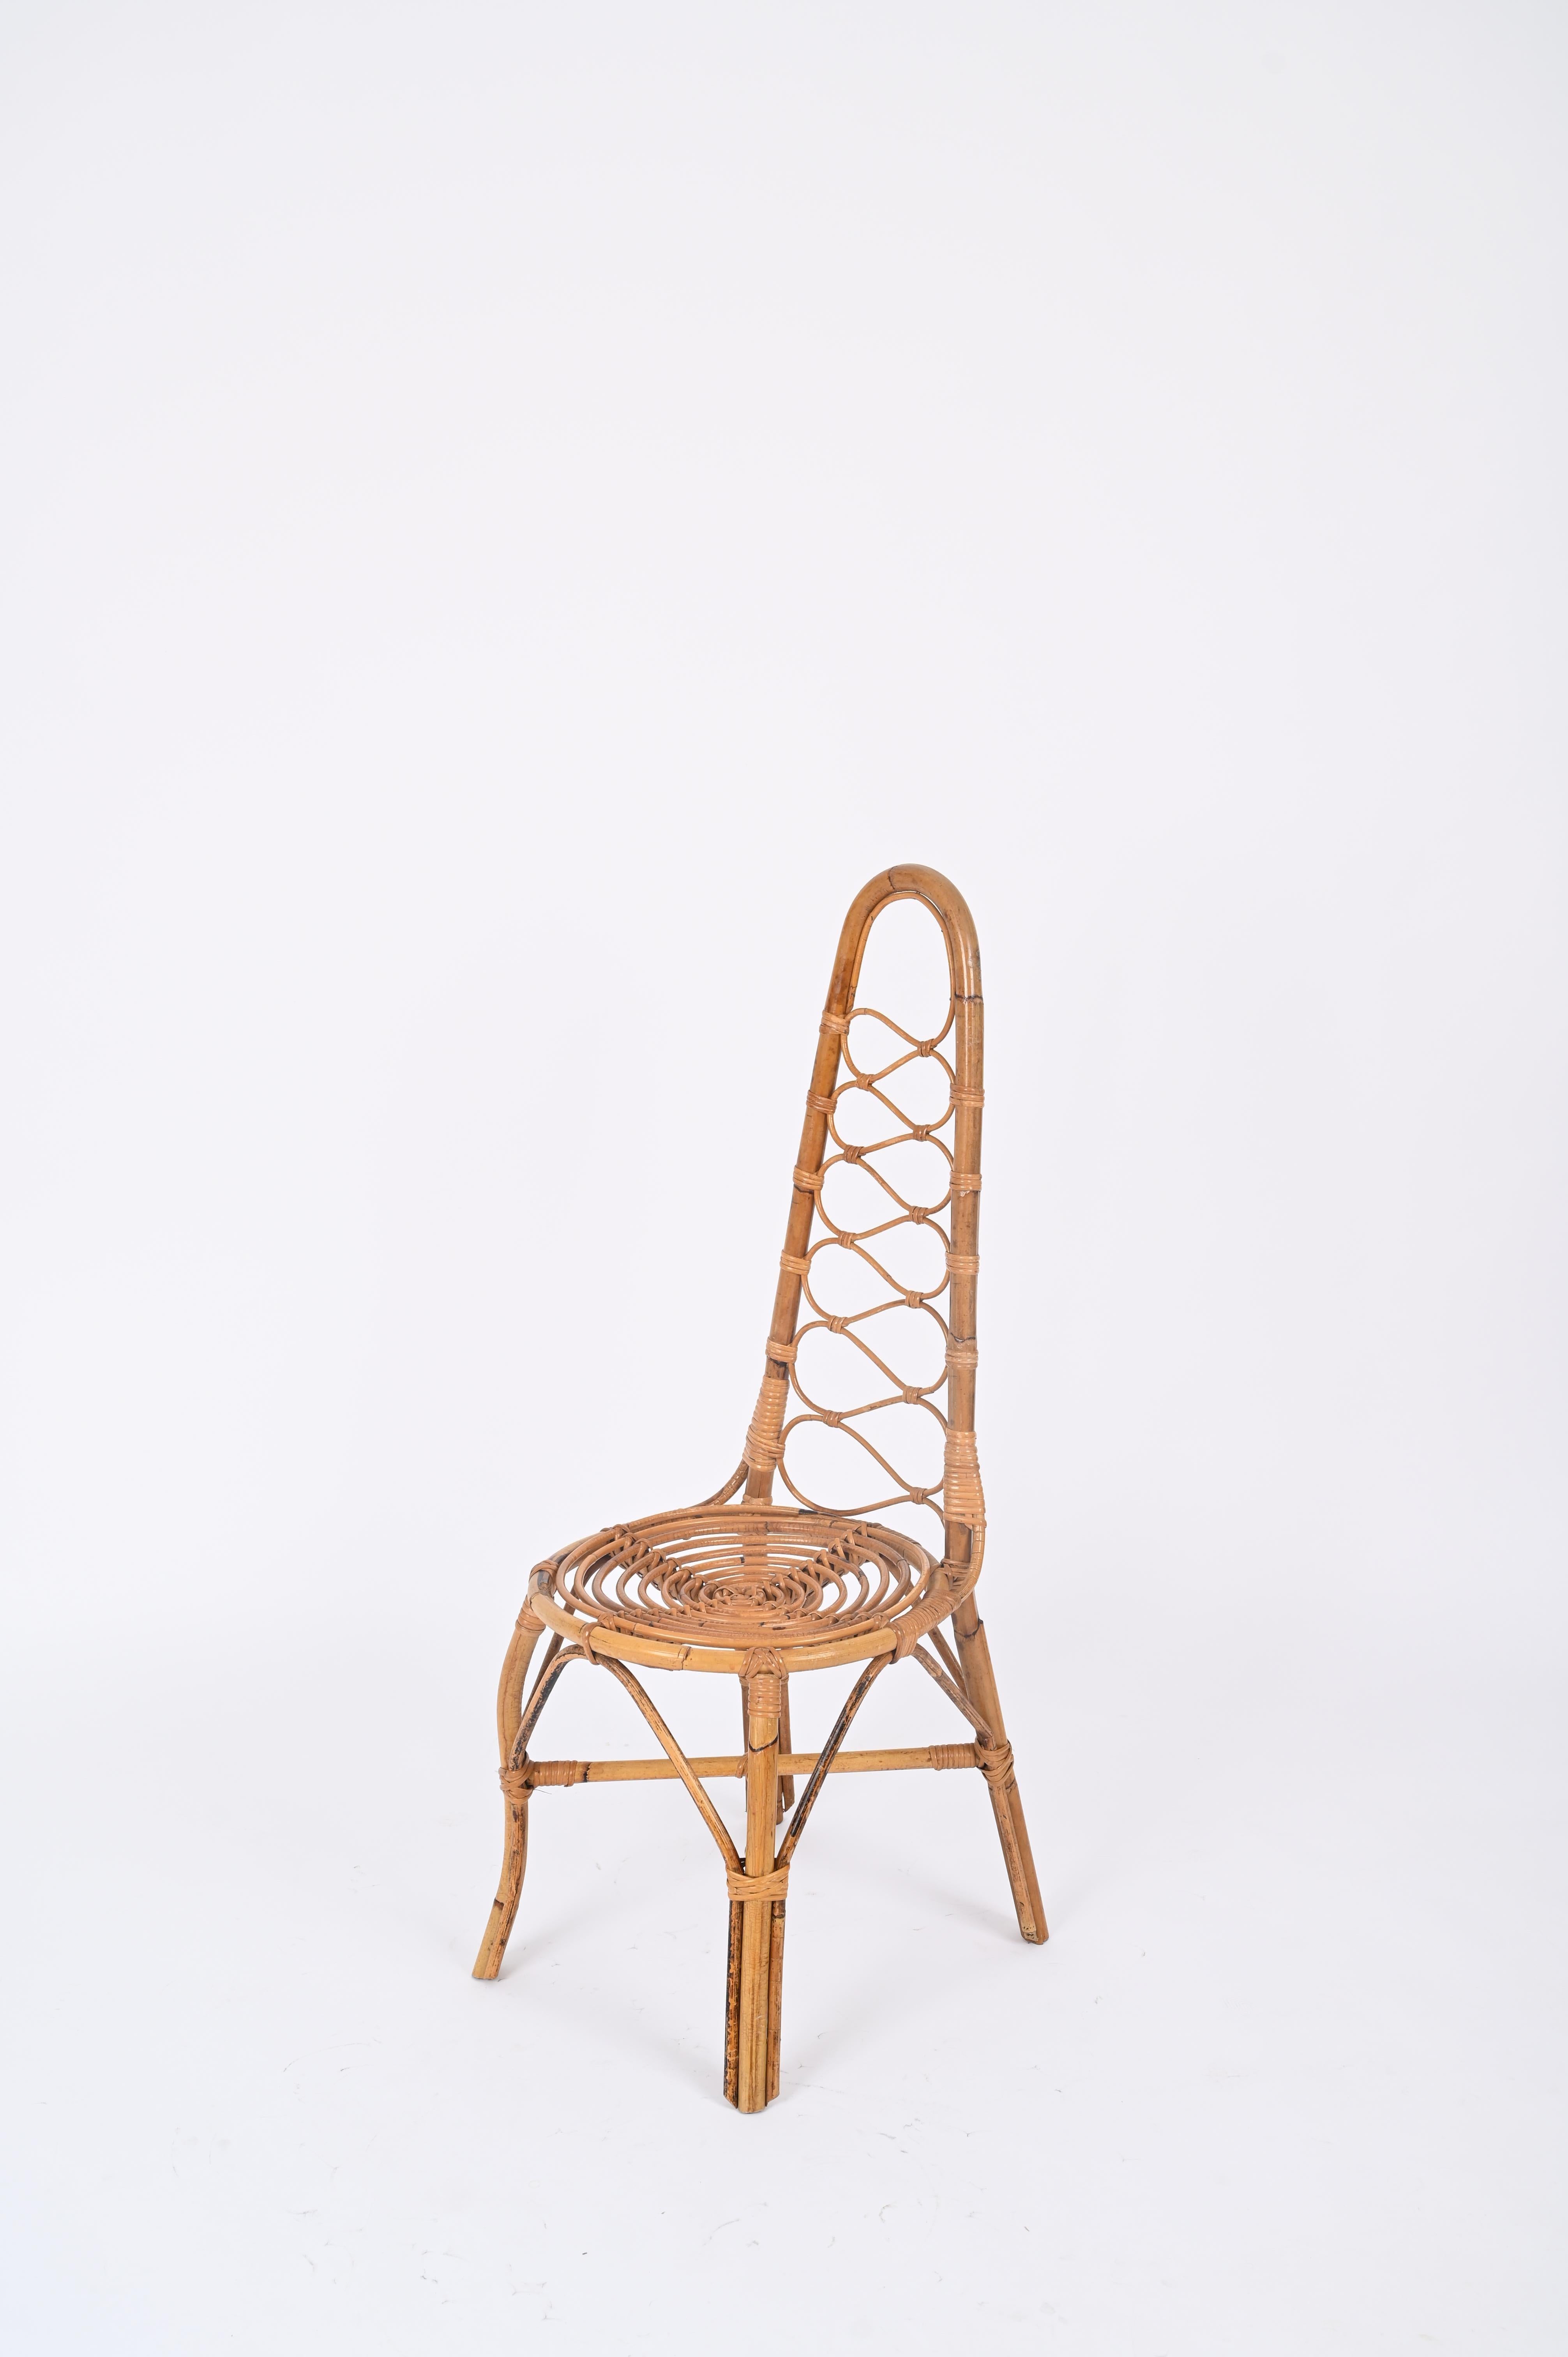 Beautiful organic high back chair in bamboo, rattan and hand-woven wicker. This fantastic chair was produced in Italy in the 1960s and is attributed to Bonacina.

The chair feature a stunning sturdy base made in a combination of curved bamboo and